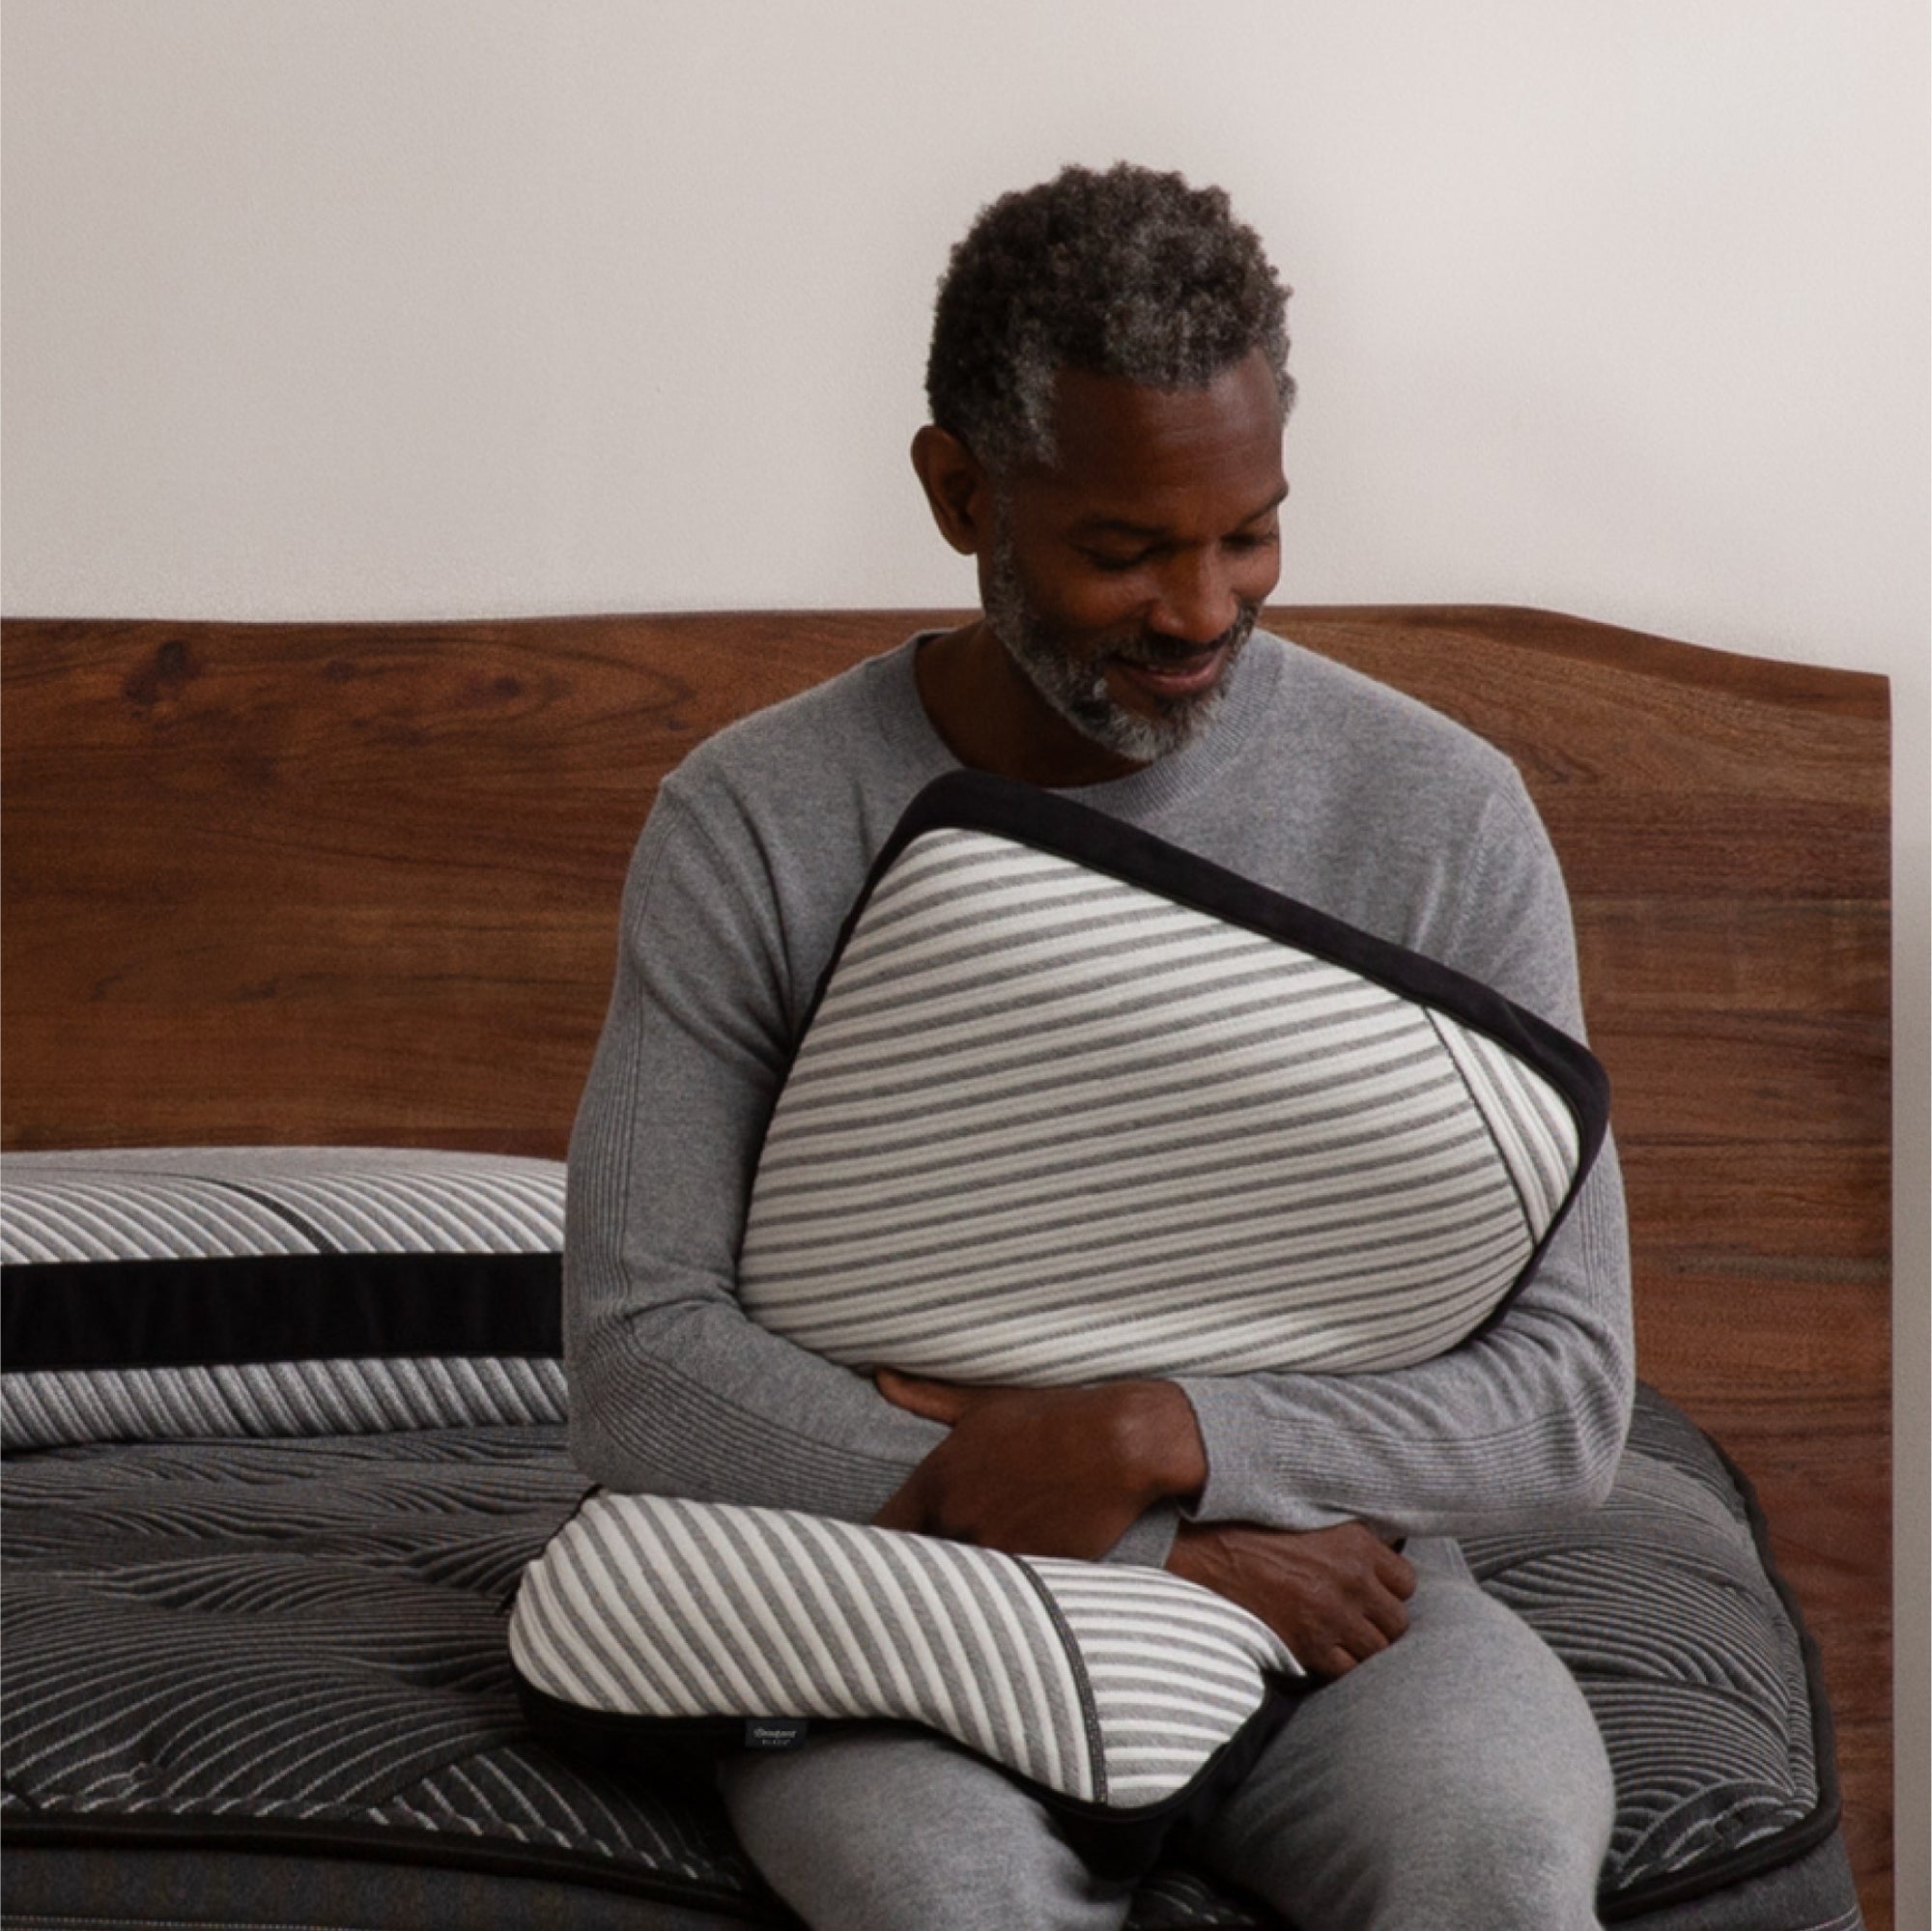 A man sitting on a bed, squeezing the Beautyrest Black Luxury Foam Pillow